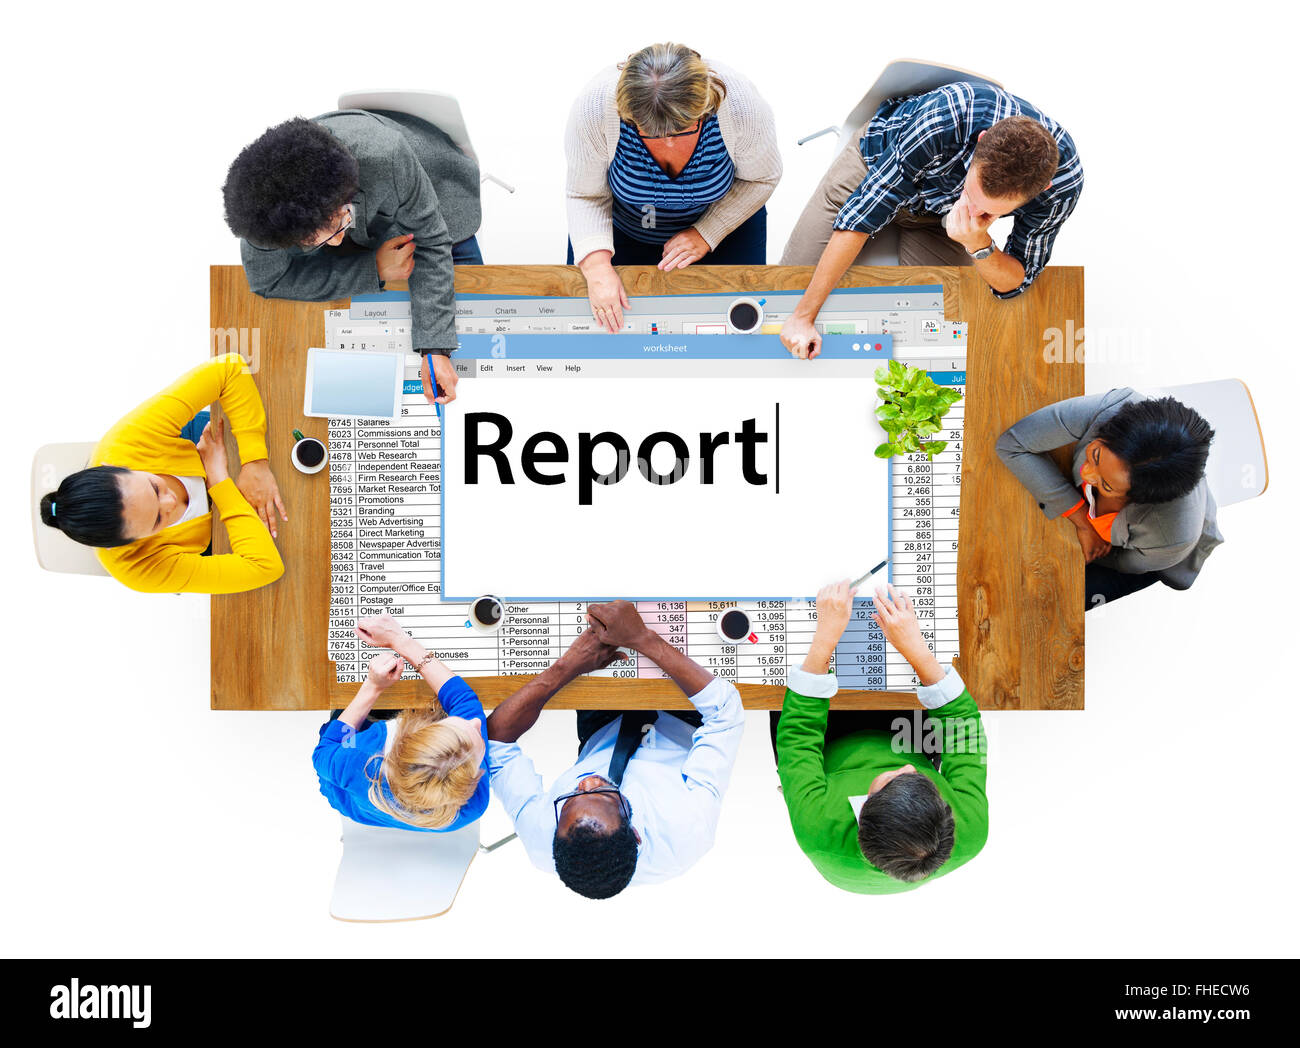 Report Reporting Resulting Information Article Concept Stock Photo